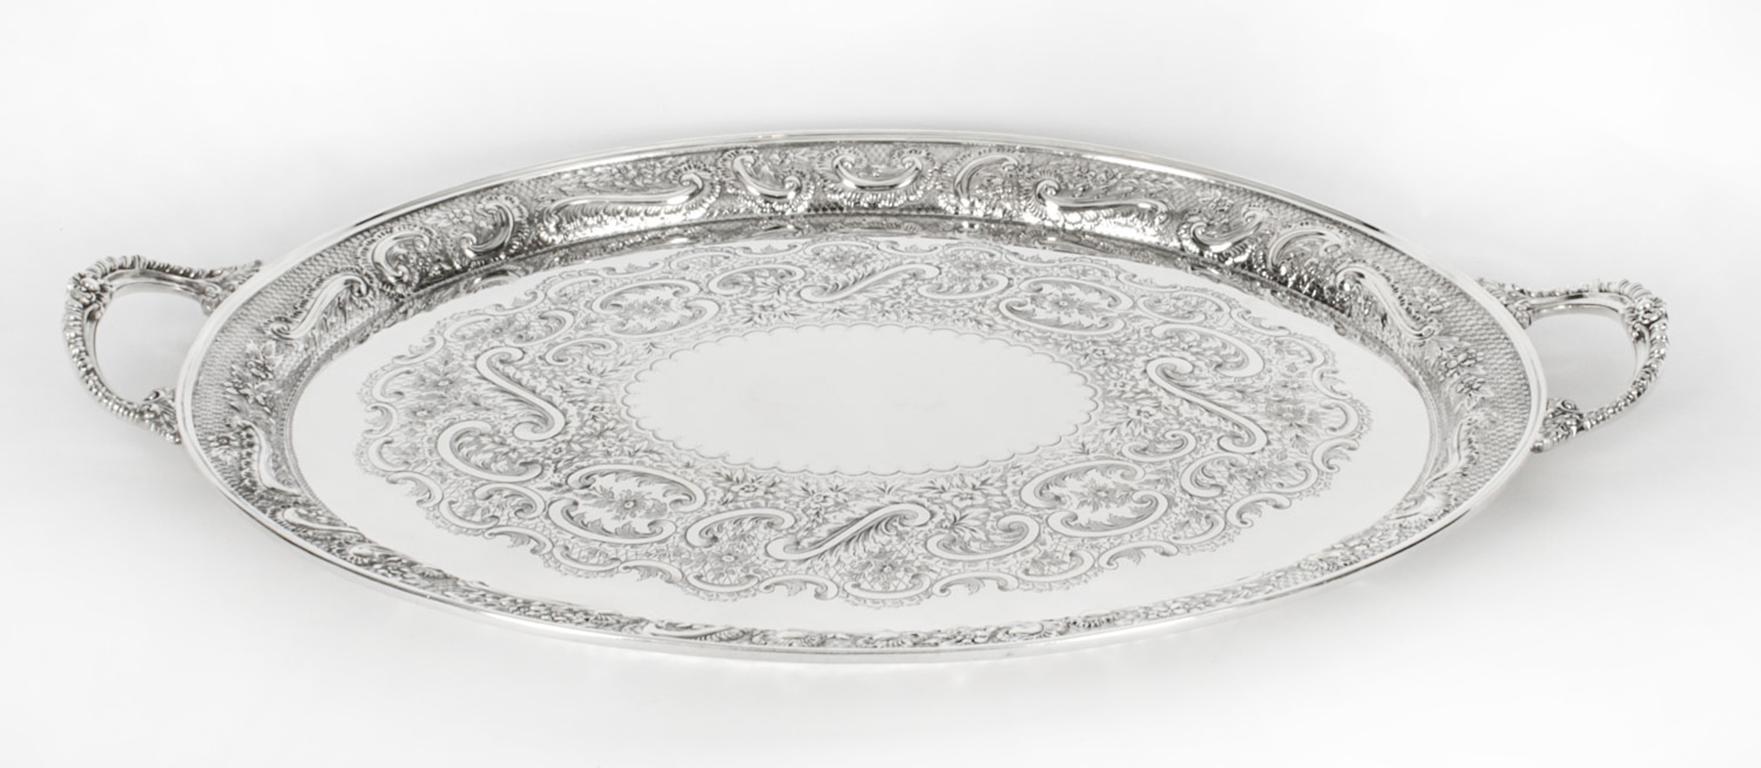 Antique Oval Victorian Silver Plated Tray by Mappin & Webb, 19th Century 12